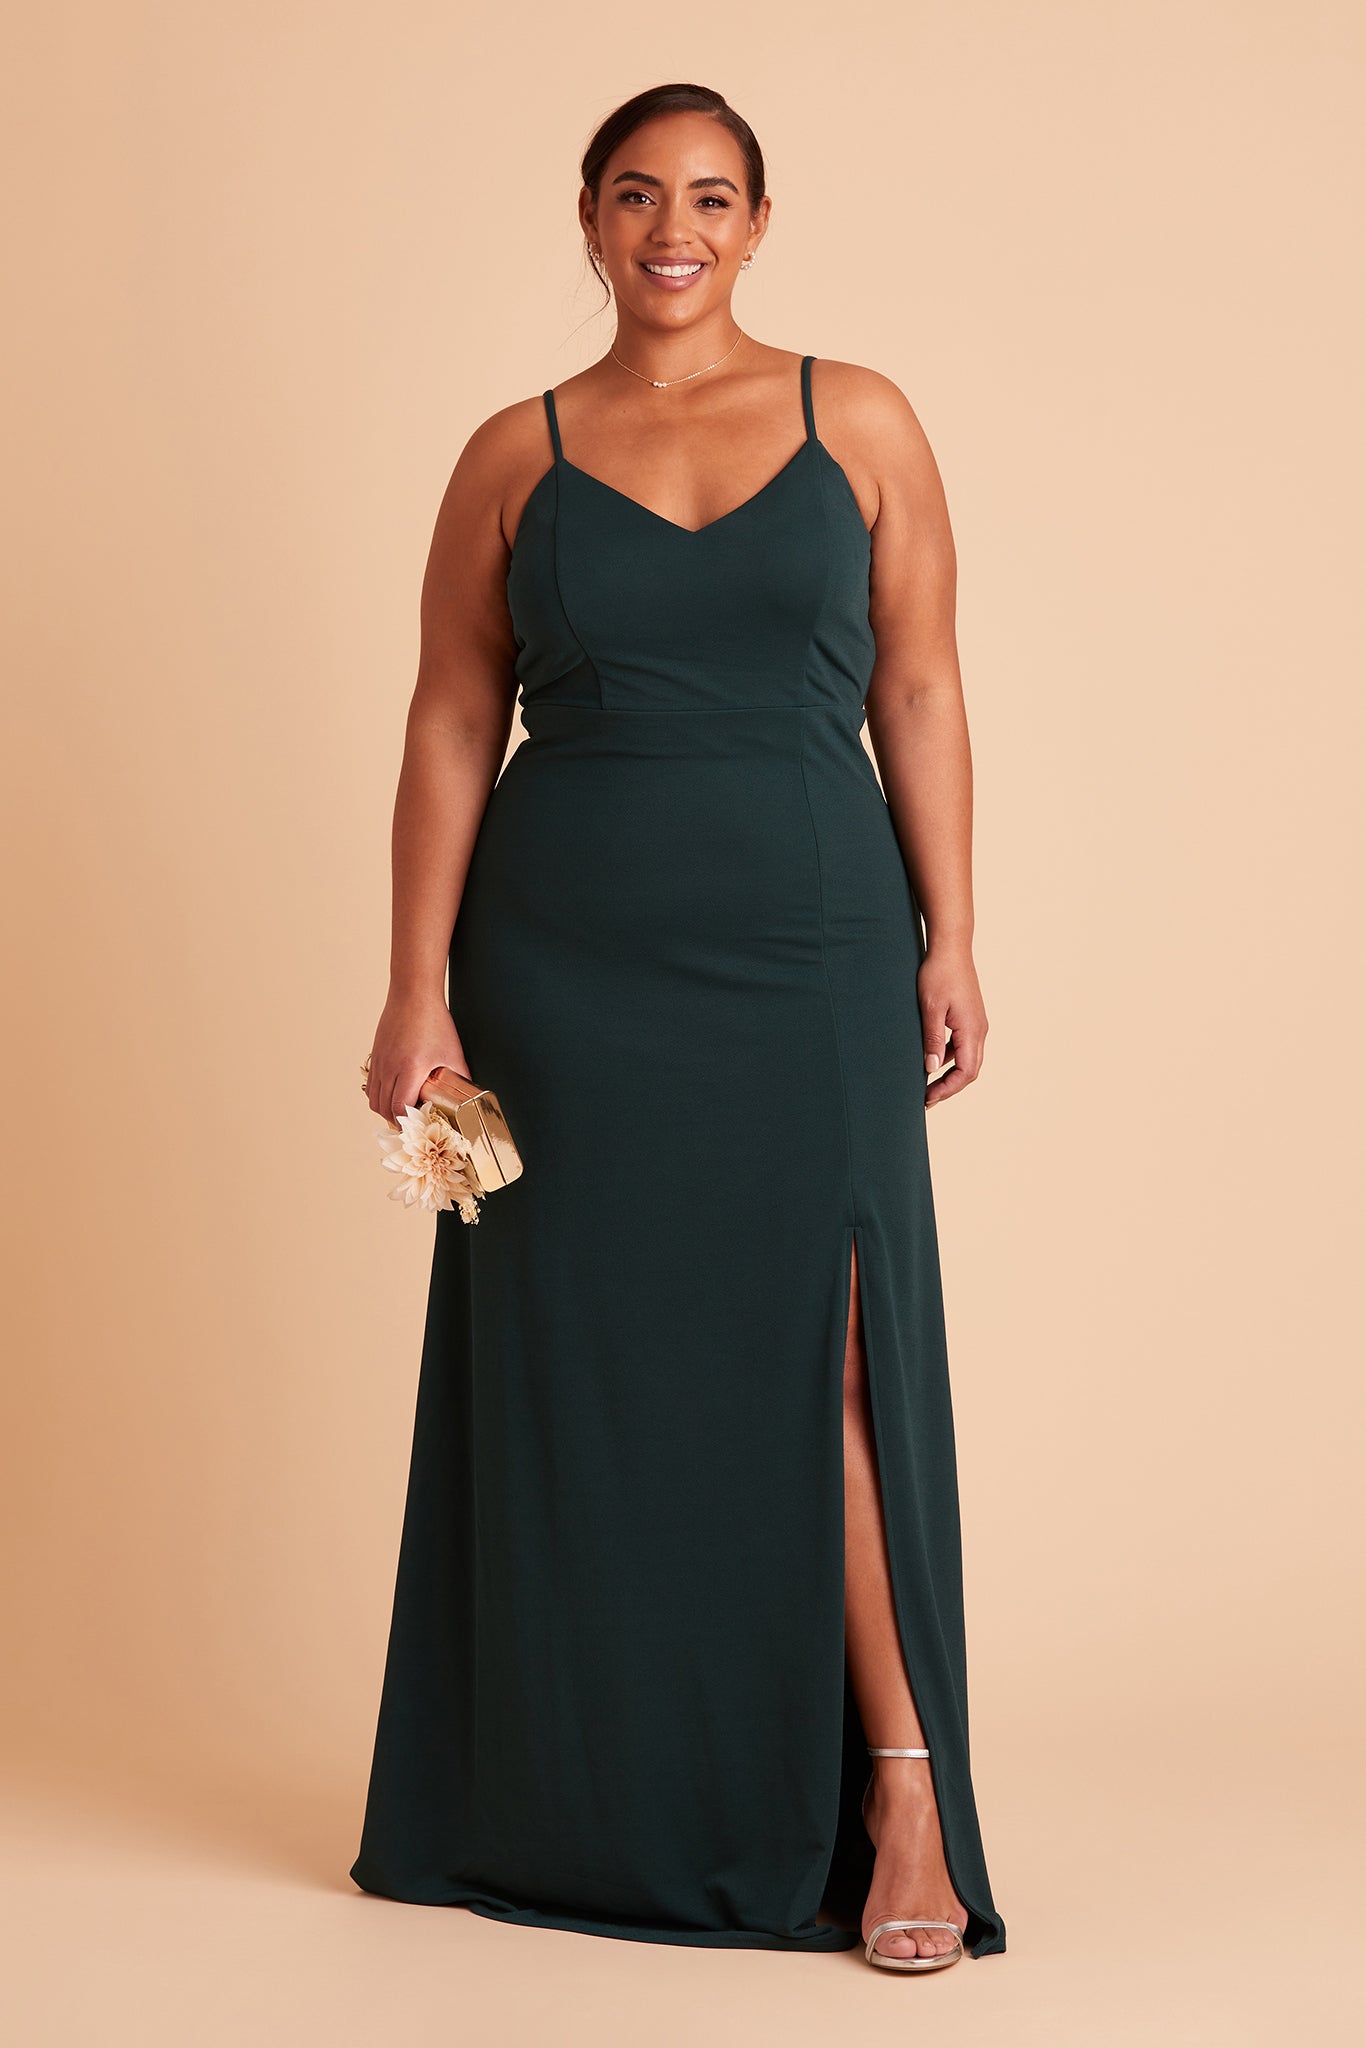 Jay plus size bridesmaid dress with slit in emerald crepe by Birdy Grey, front view